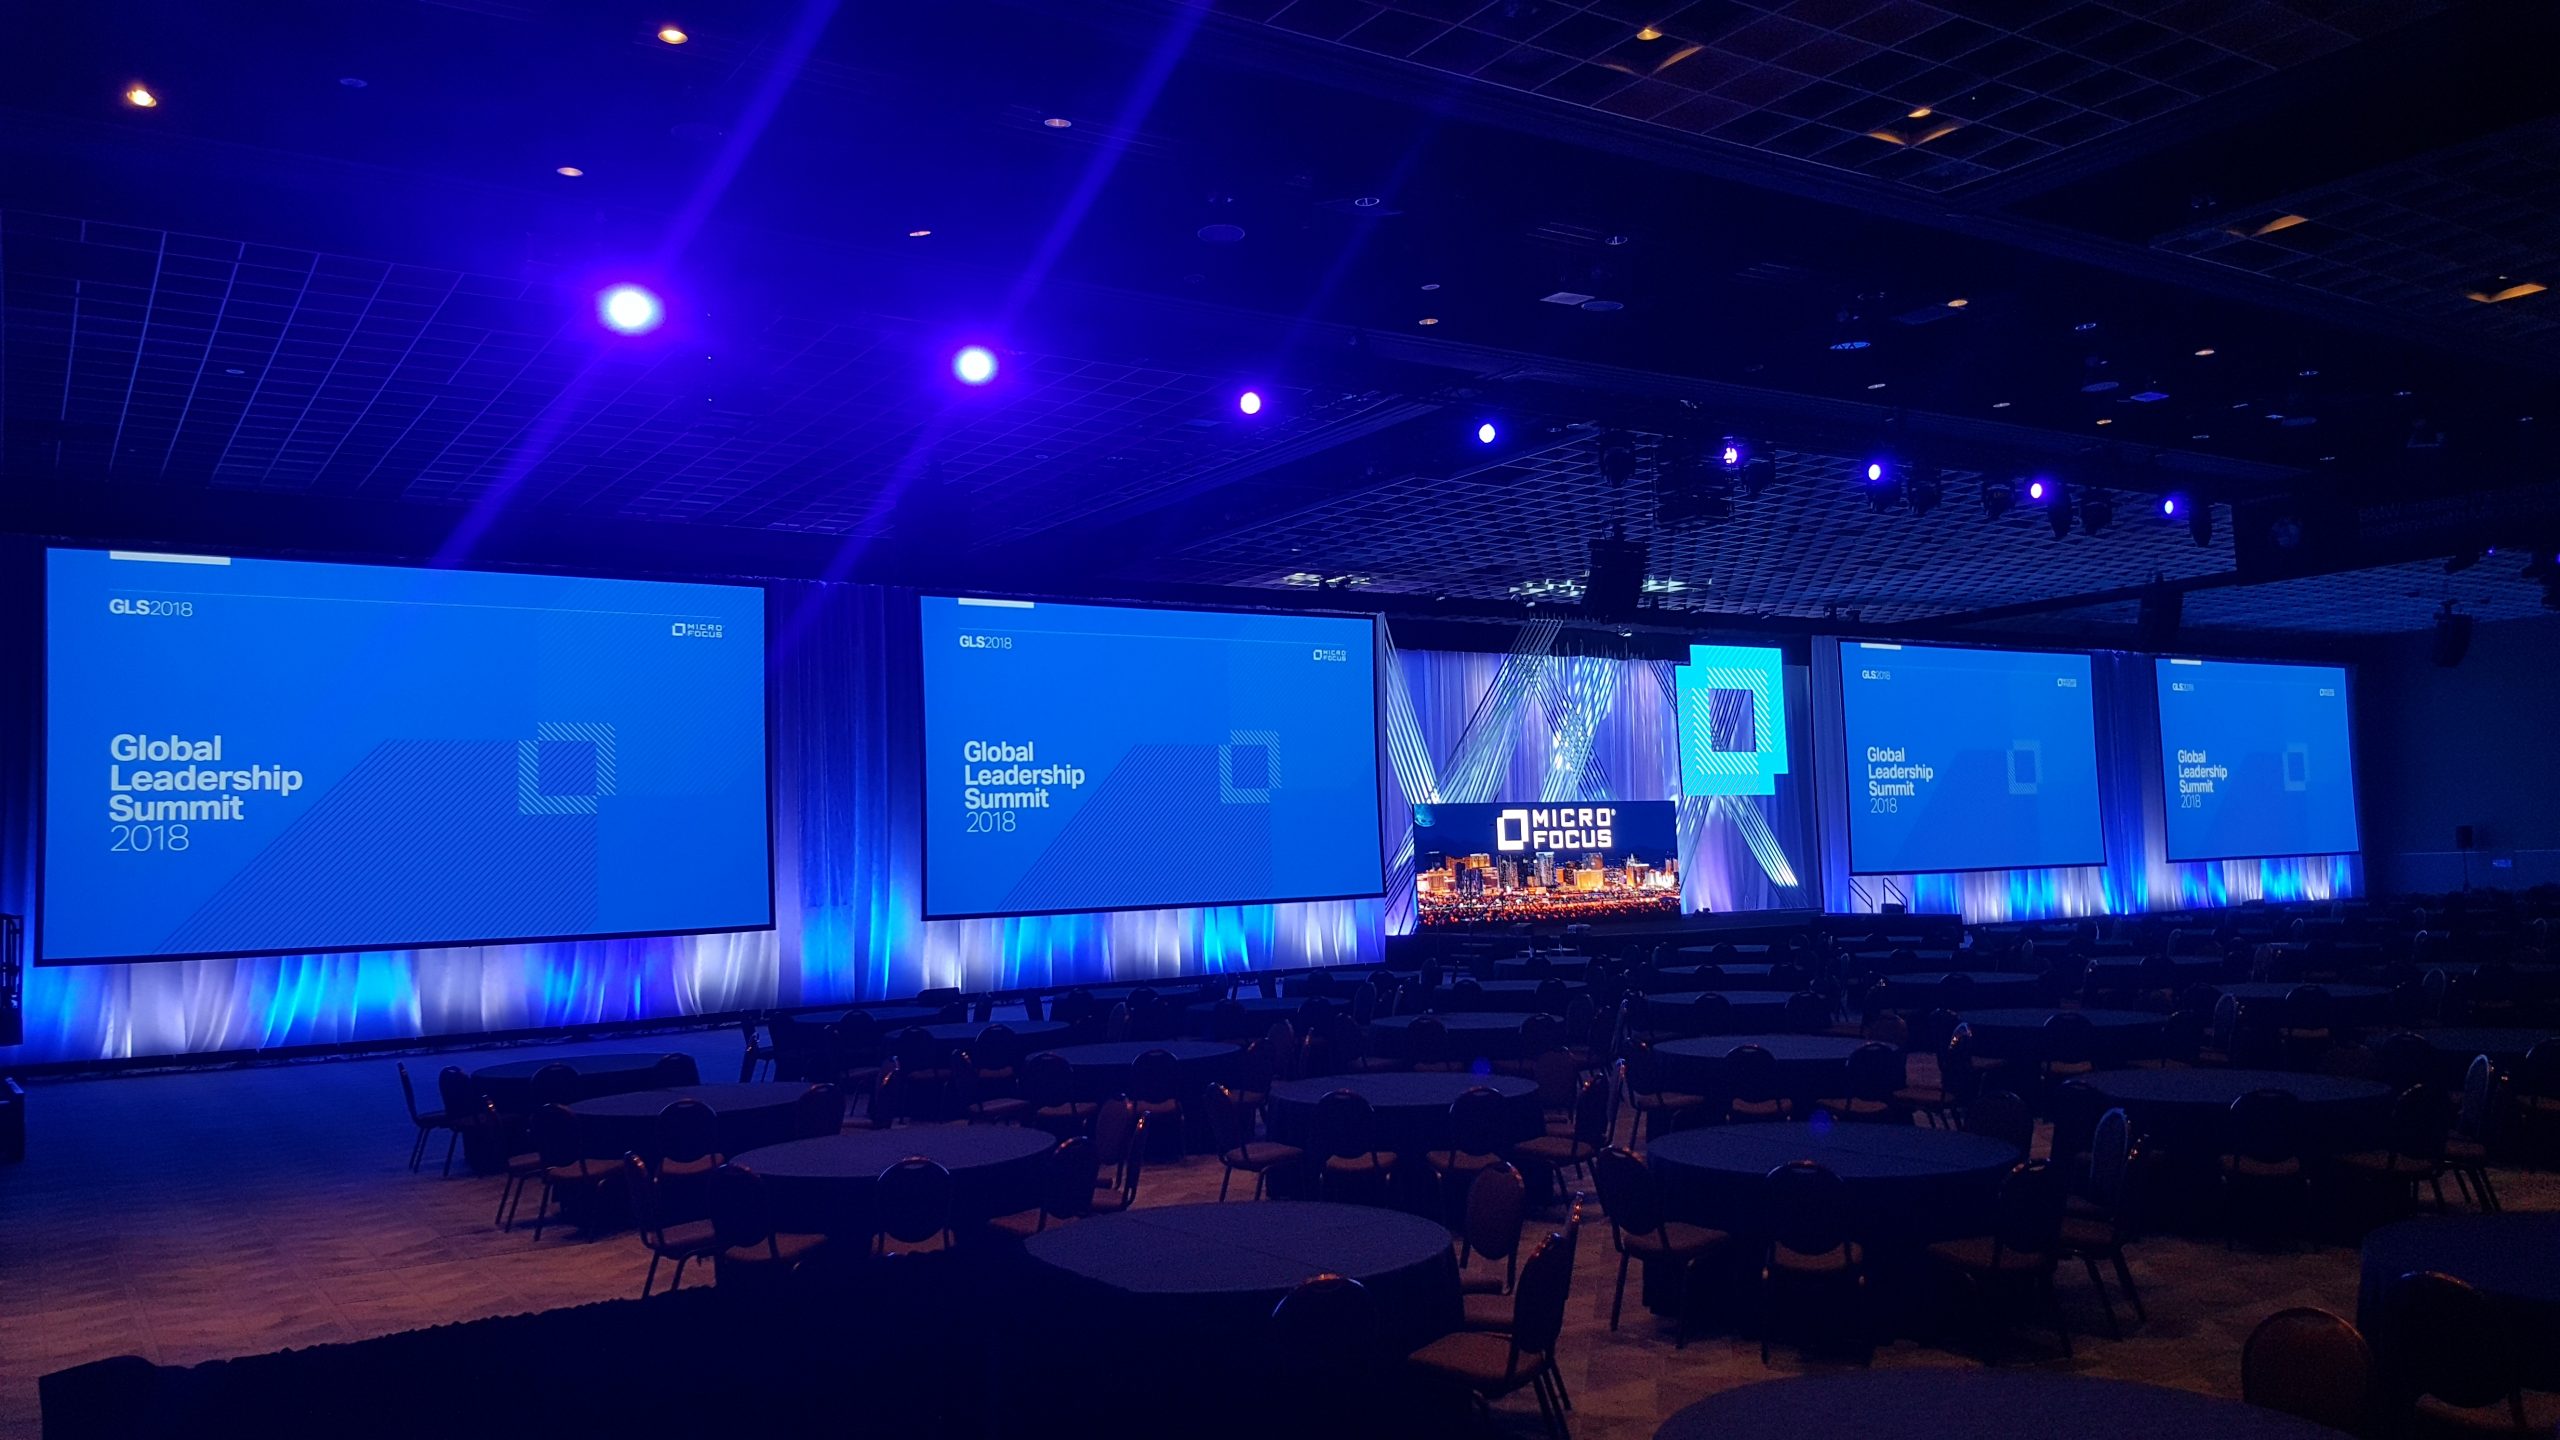 MicroFocus Summit stage, LED screens and lighting